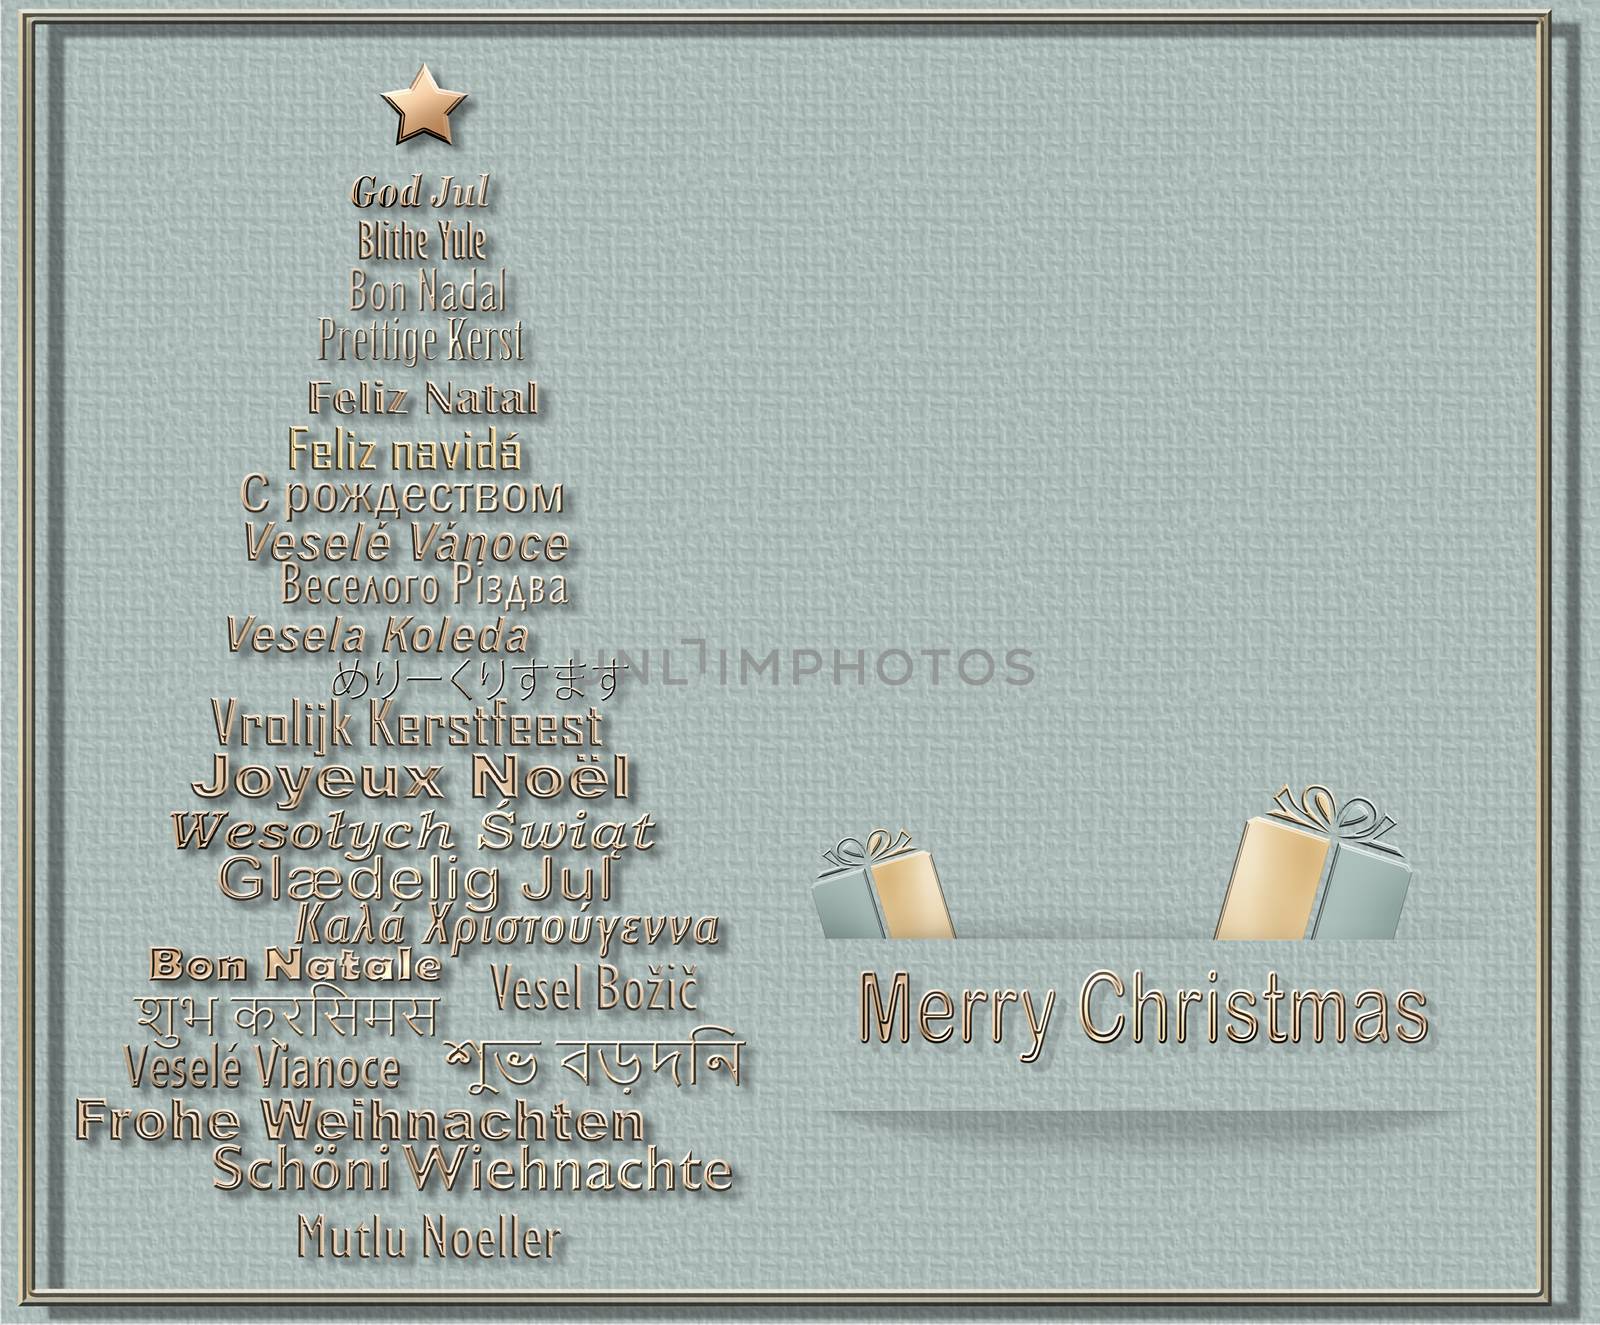 Merry Christmas card In Different European, Eastern European, Hindi, Bengali, Indian, Japanese Languages forming Christmas Tree and gold gift boxes on pastel green background. 3D illustration